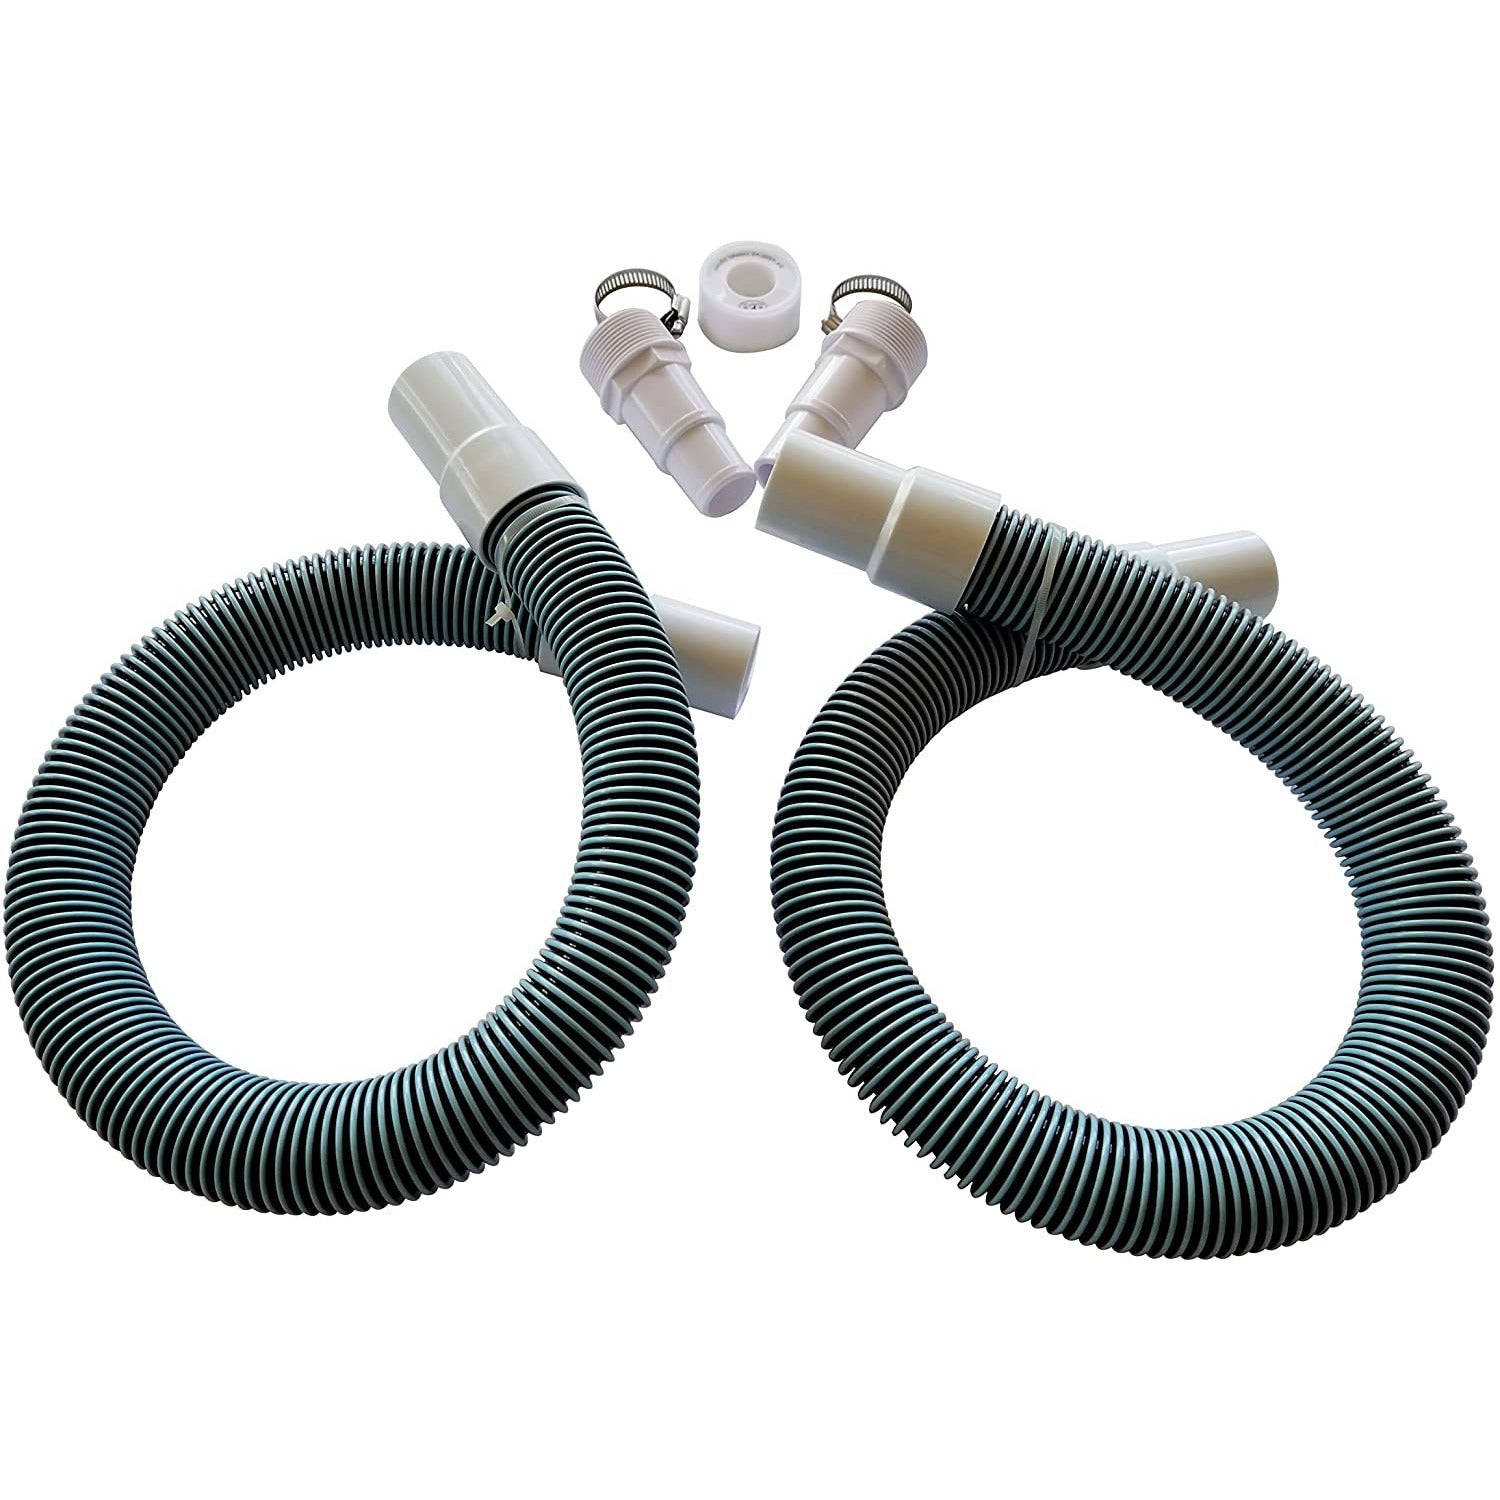 Professional 1 1/2" Swimming Pool Filter Hose Replacement Kit